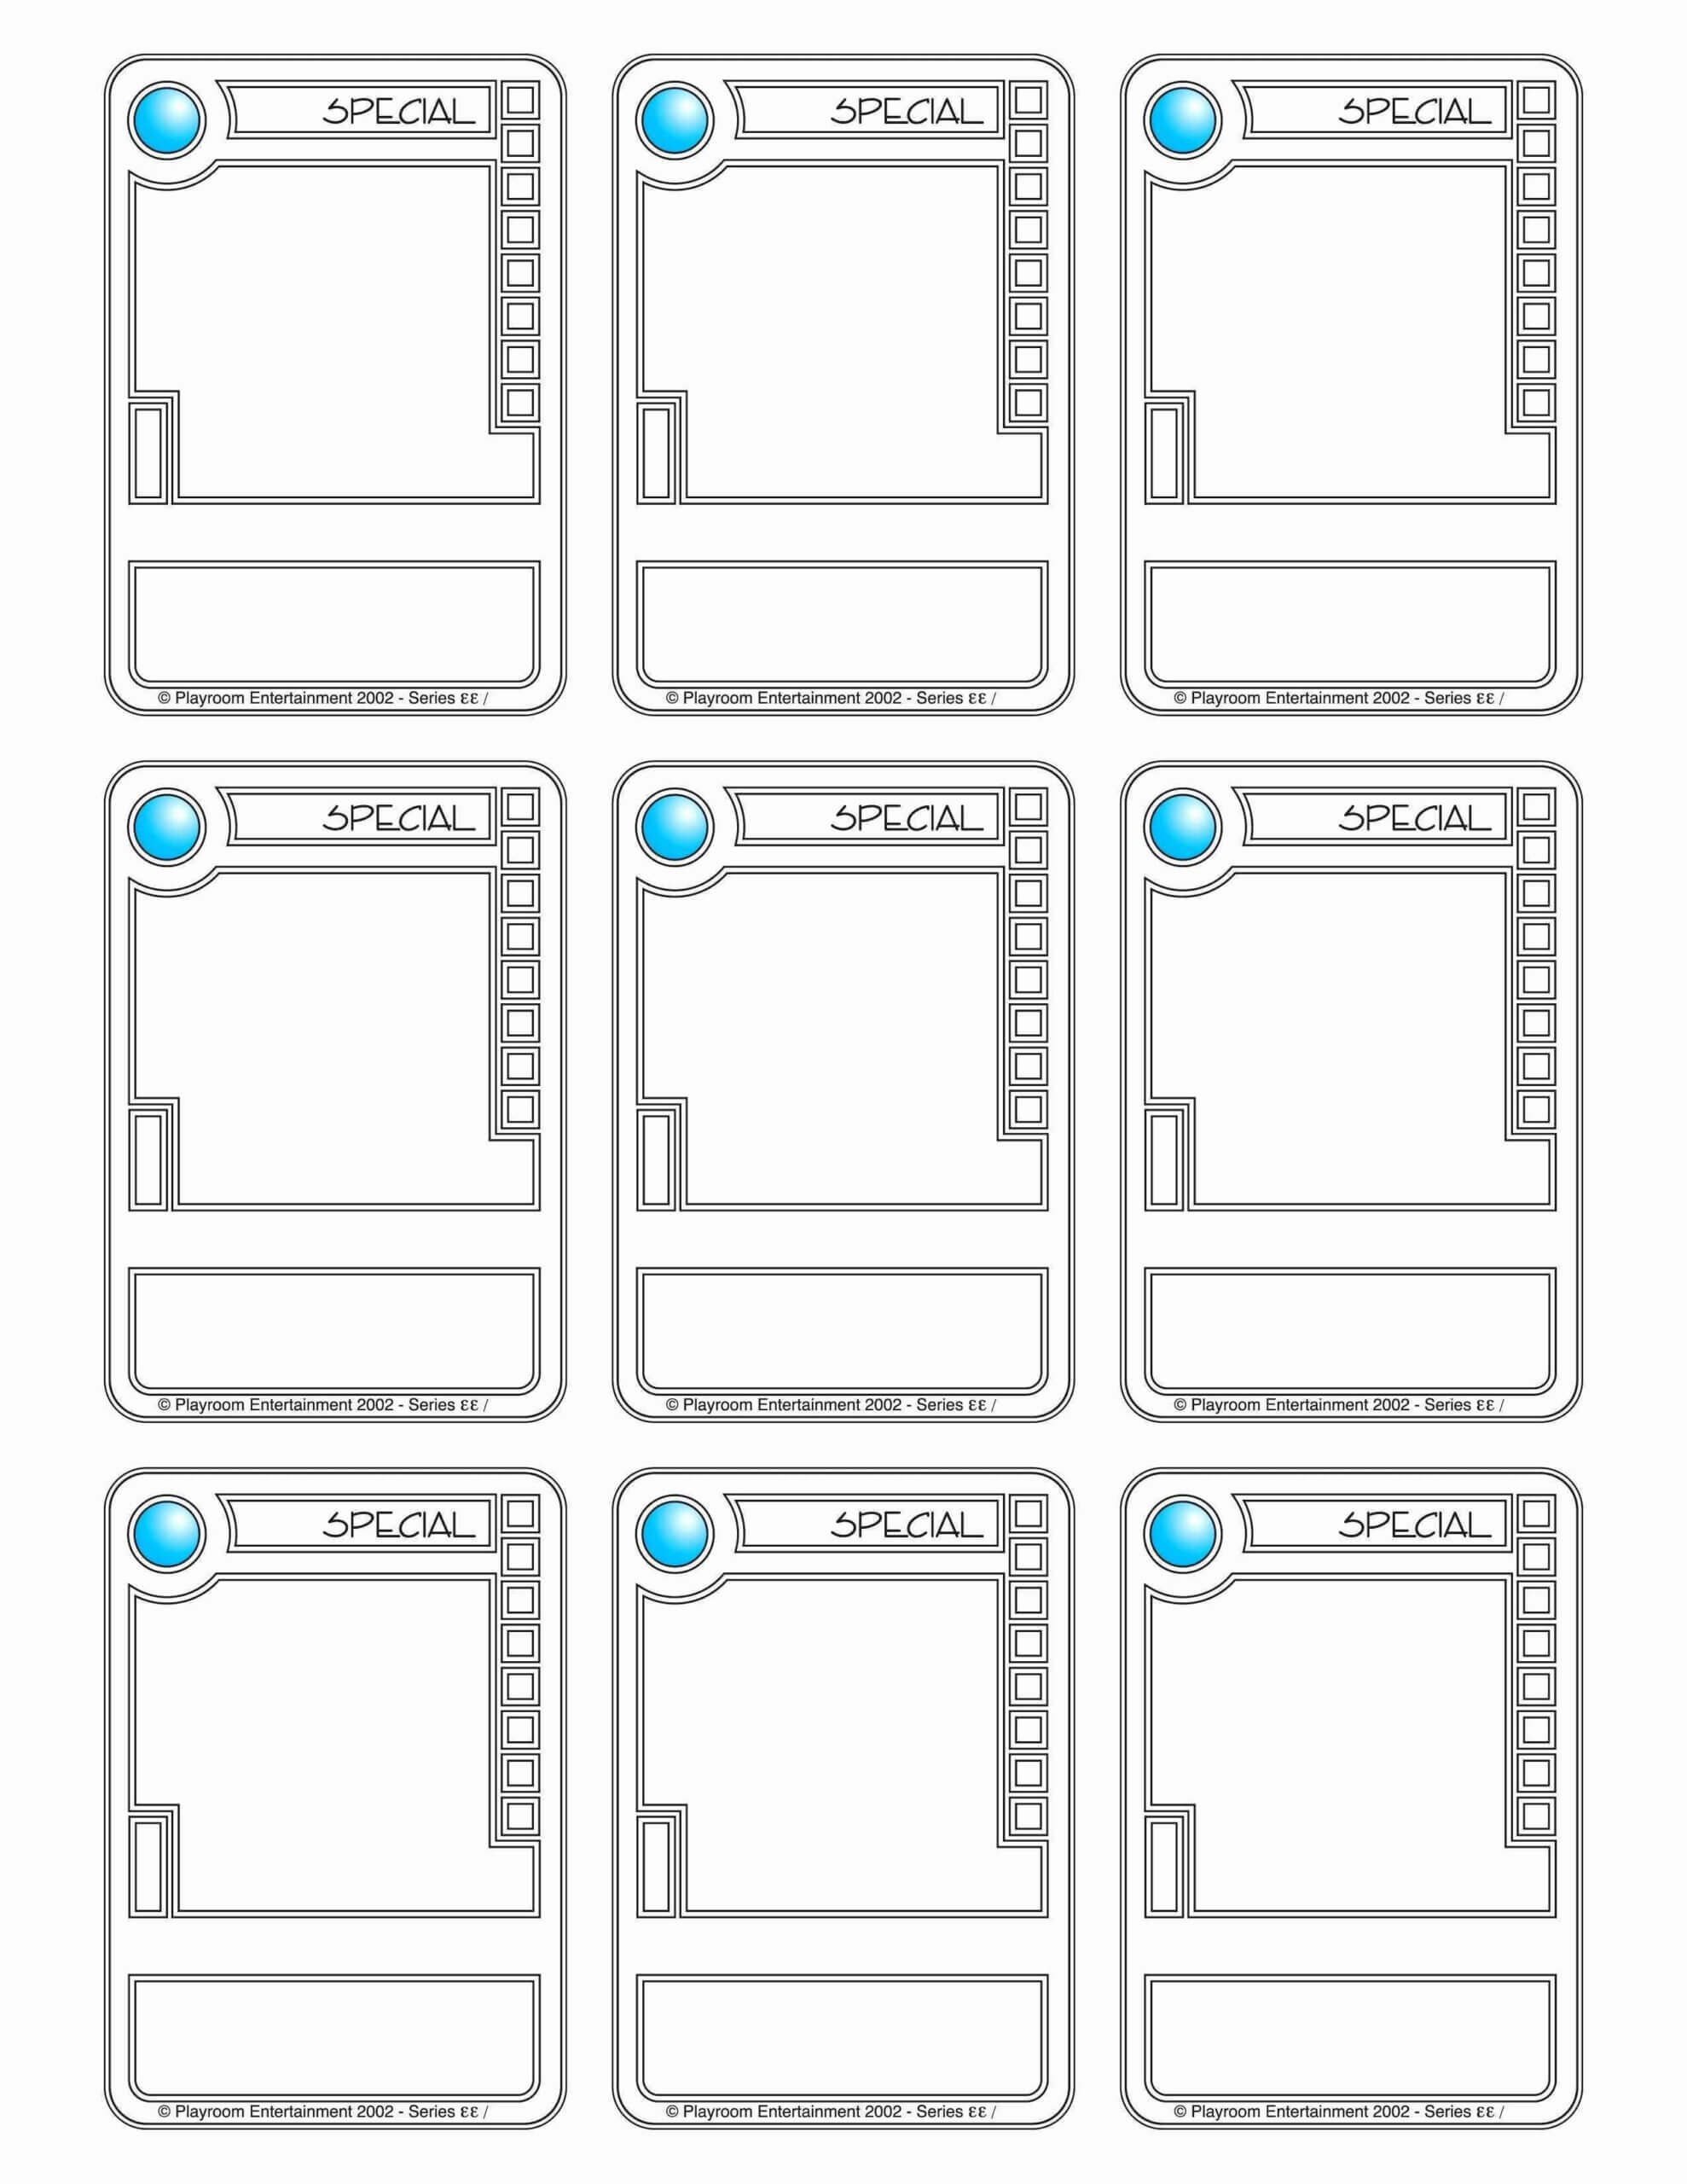 001 Trading Card Maker Free Examples Template For Success In With Regard To Template For Game Cards